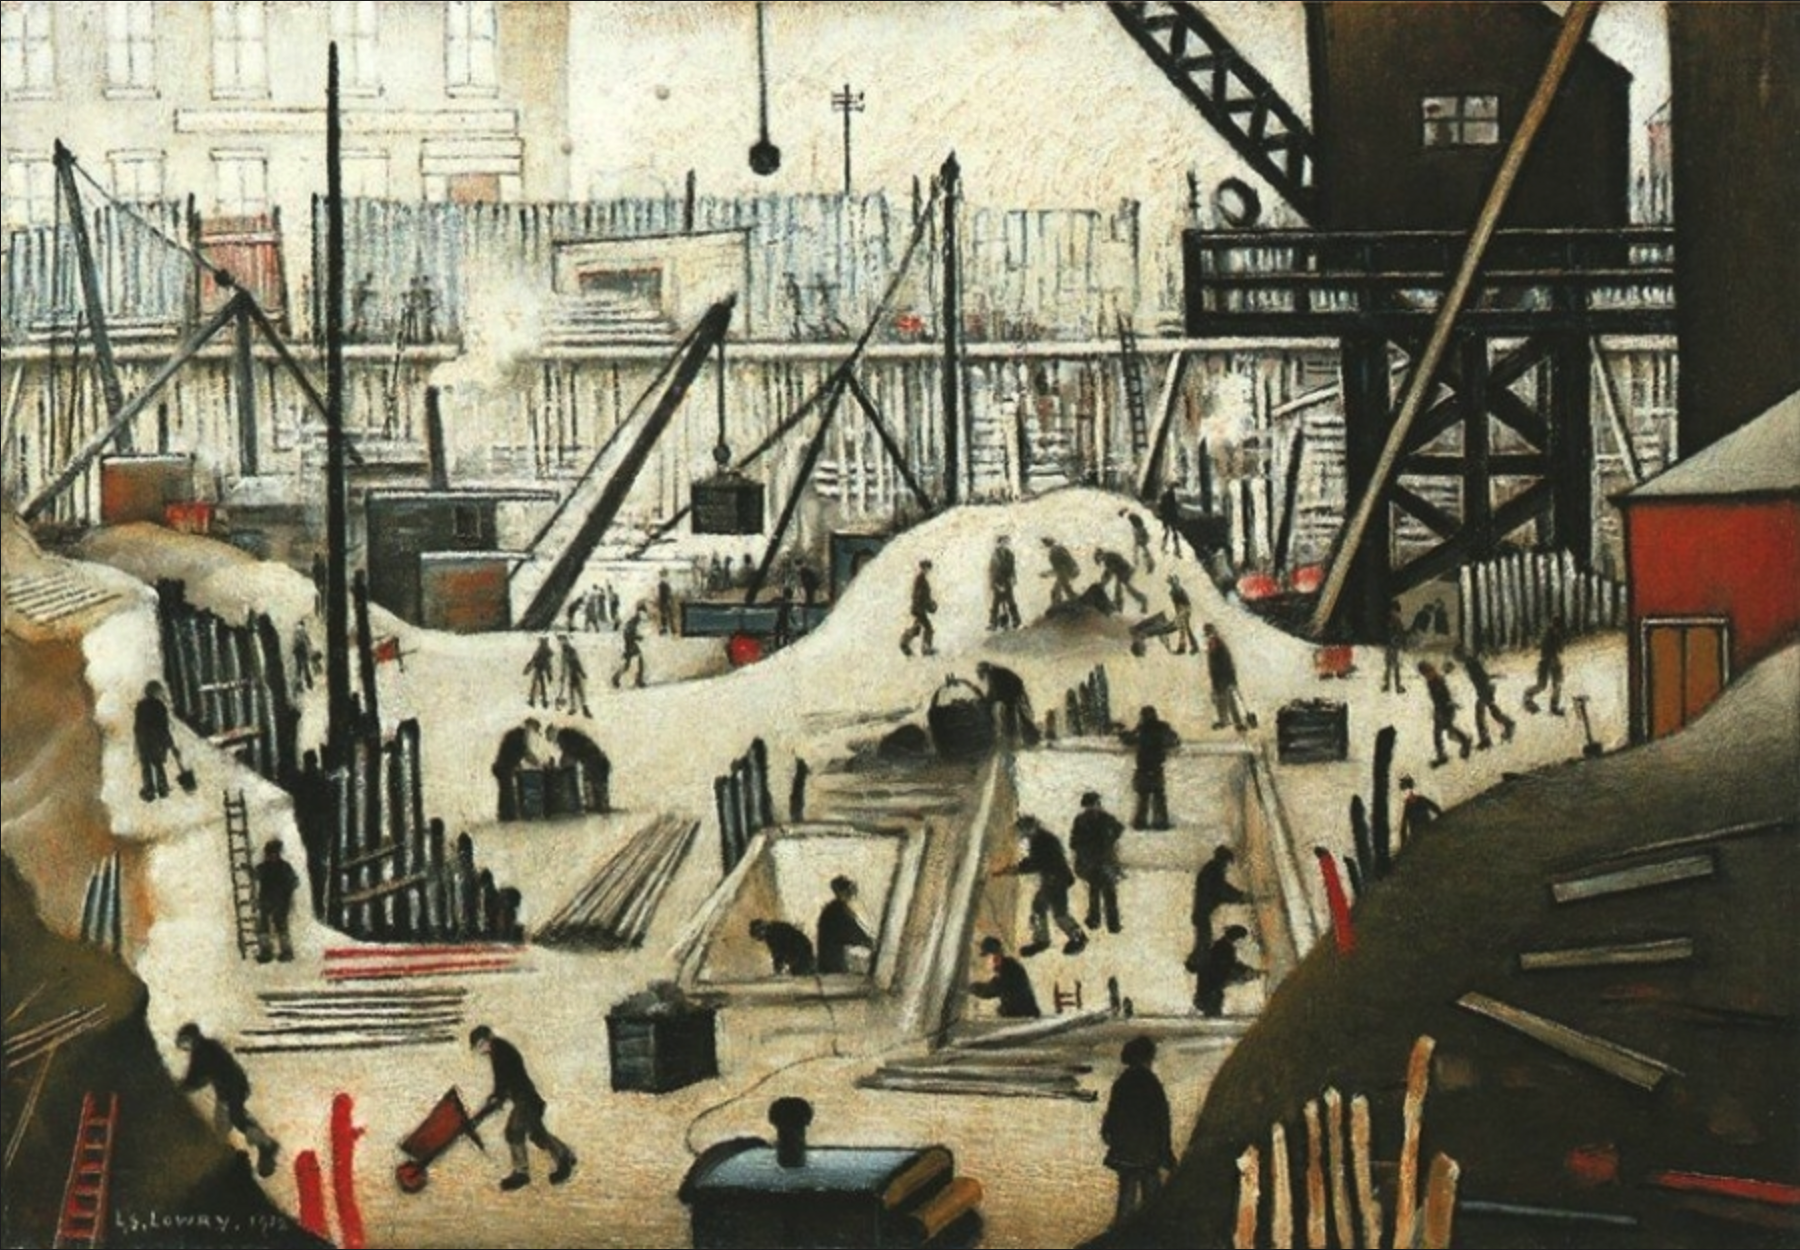 Excavating in Manchester (1932) by Laurence Stephen Lowry (1887 - 1976), English artist.